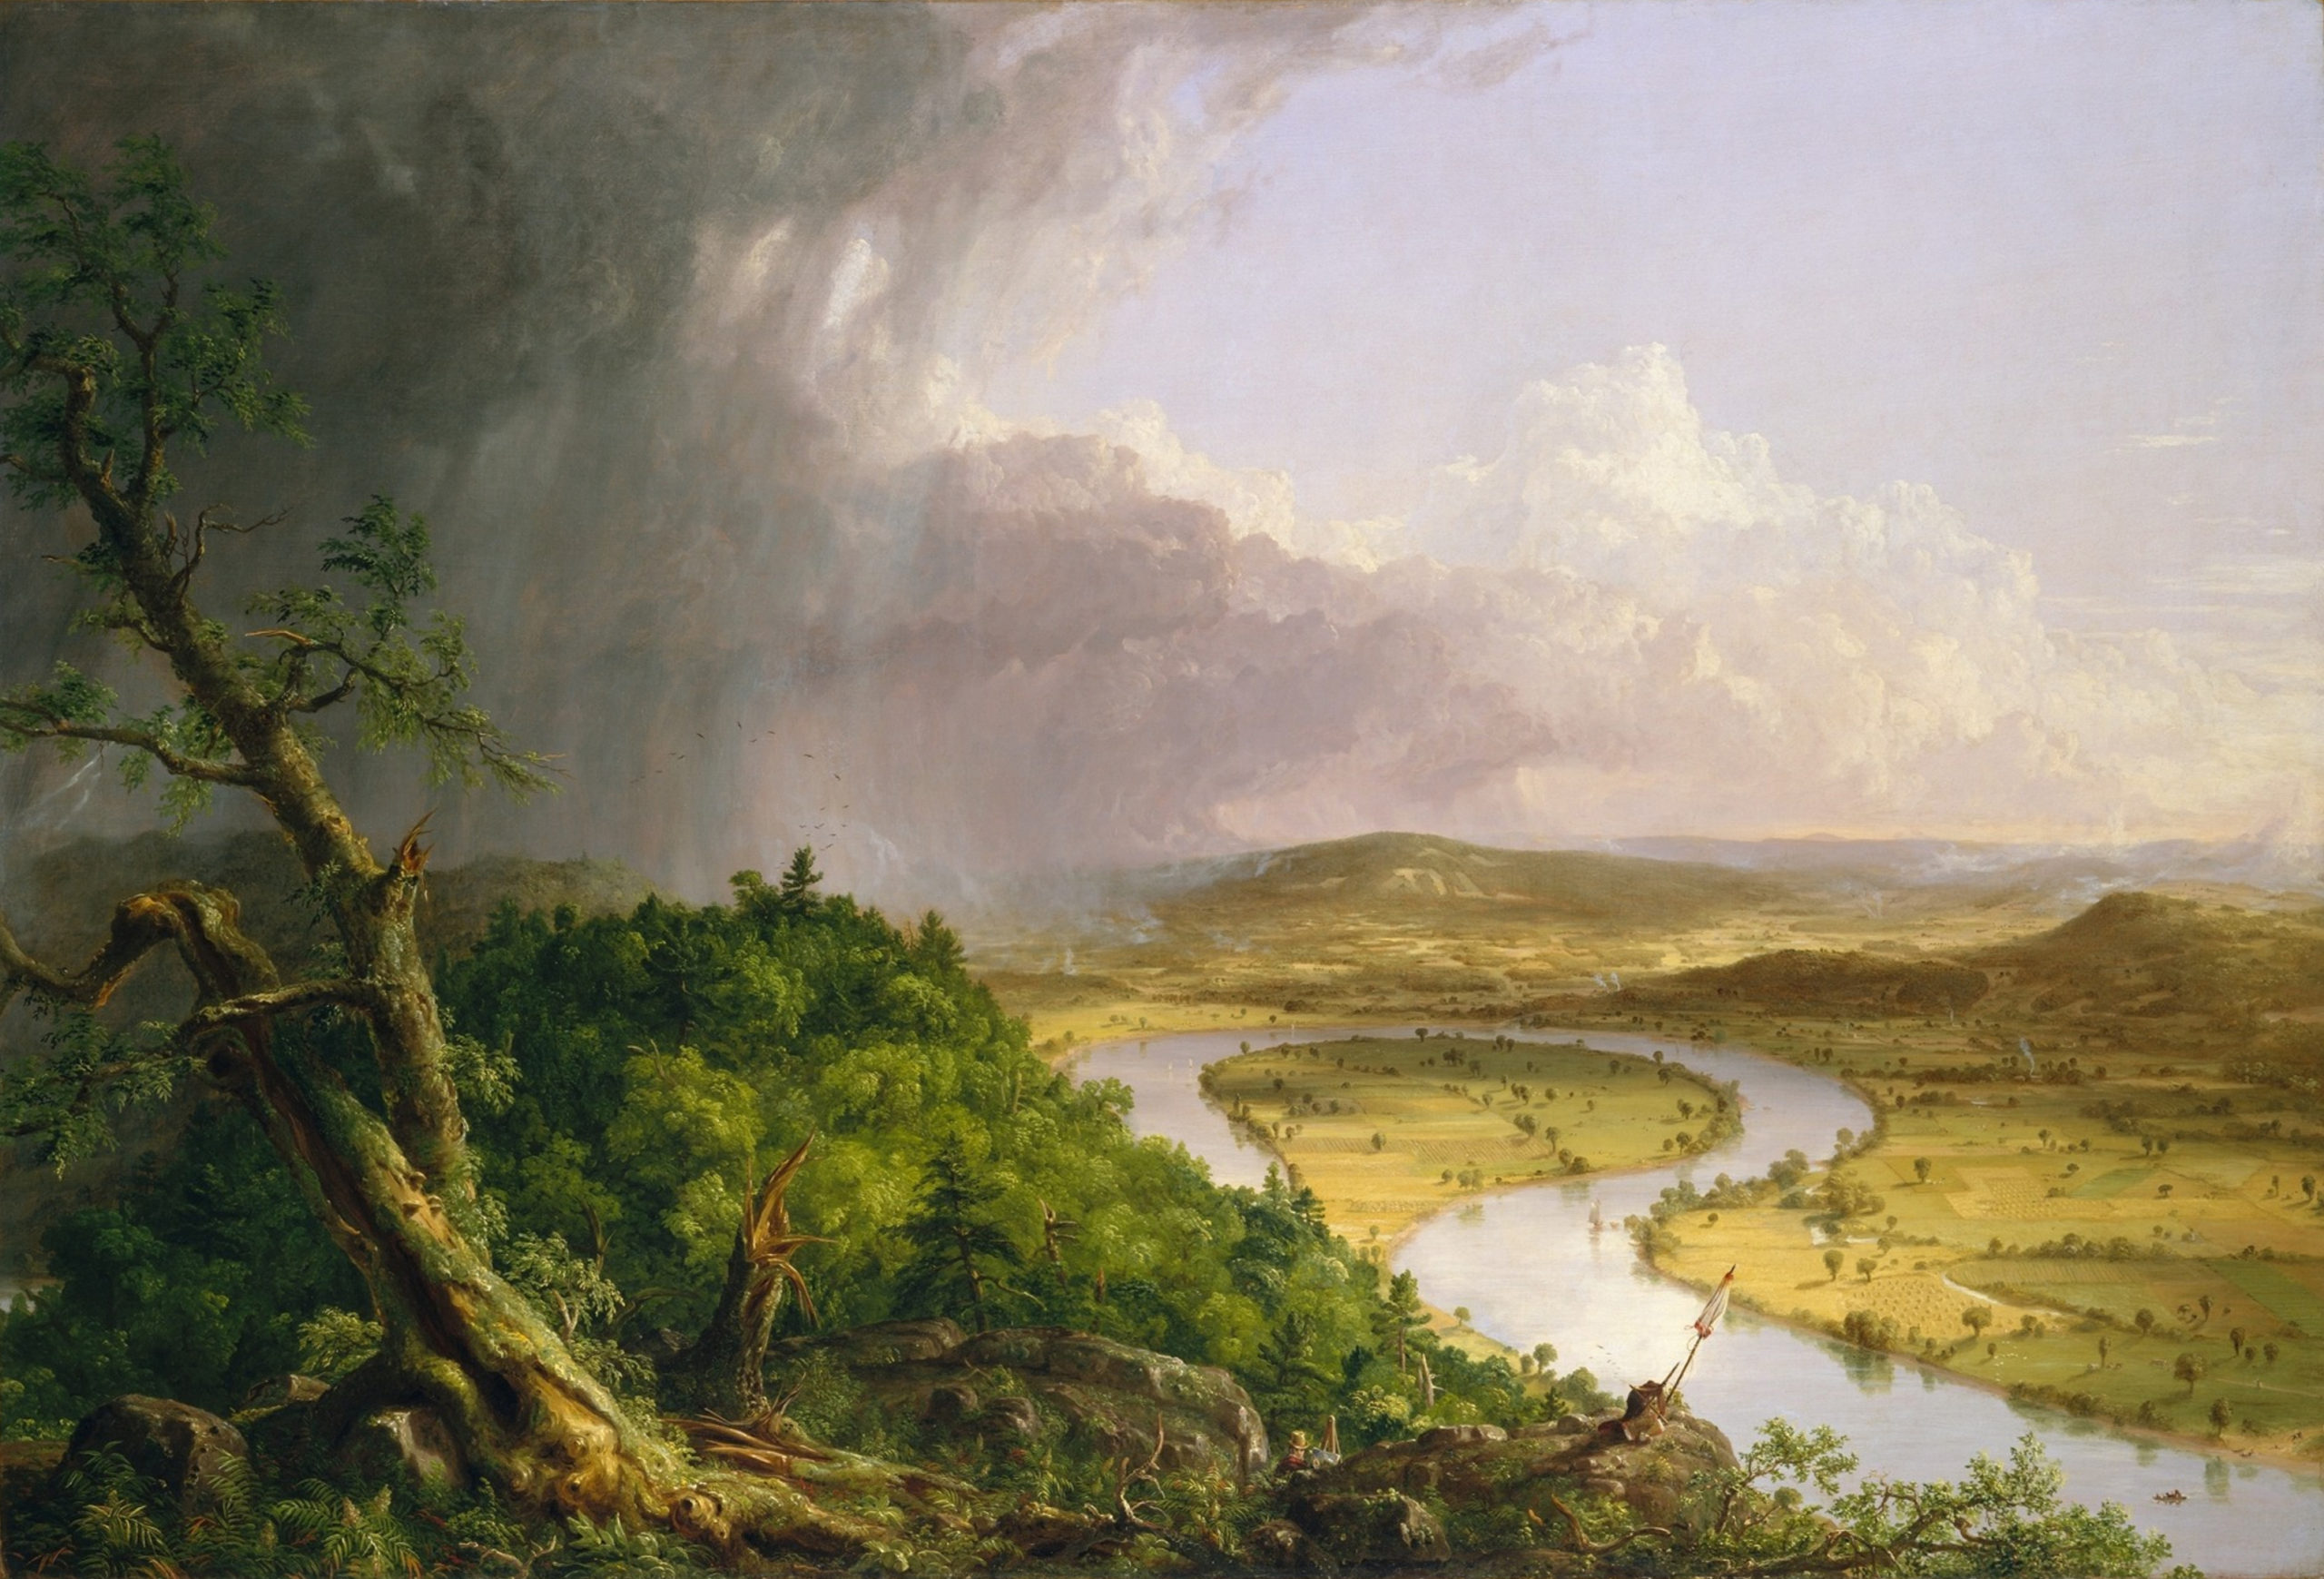 Painting of Nature by Thomas Cle